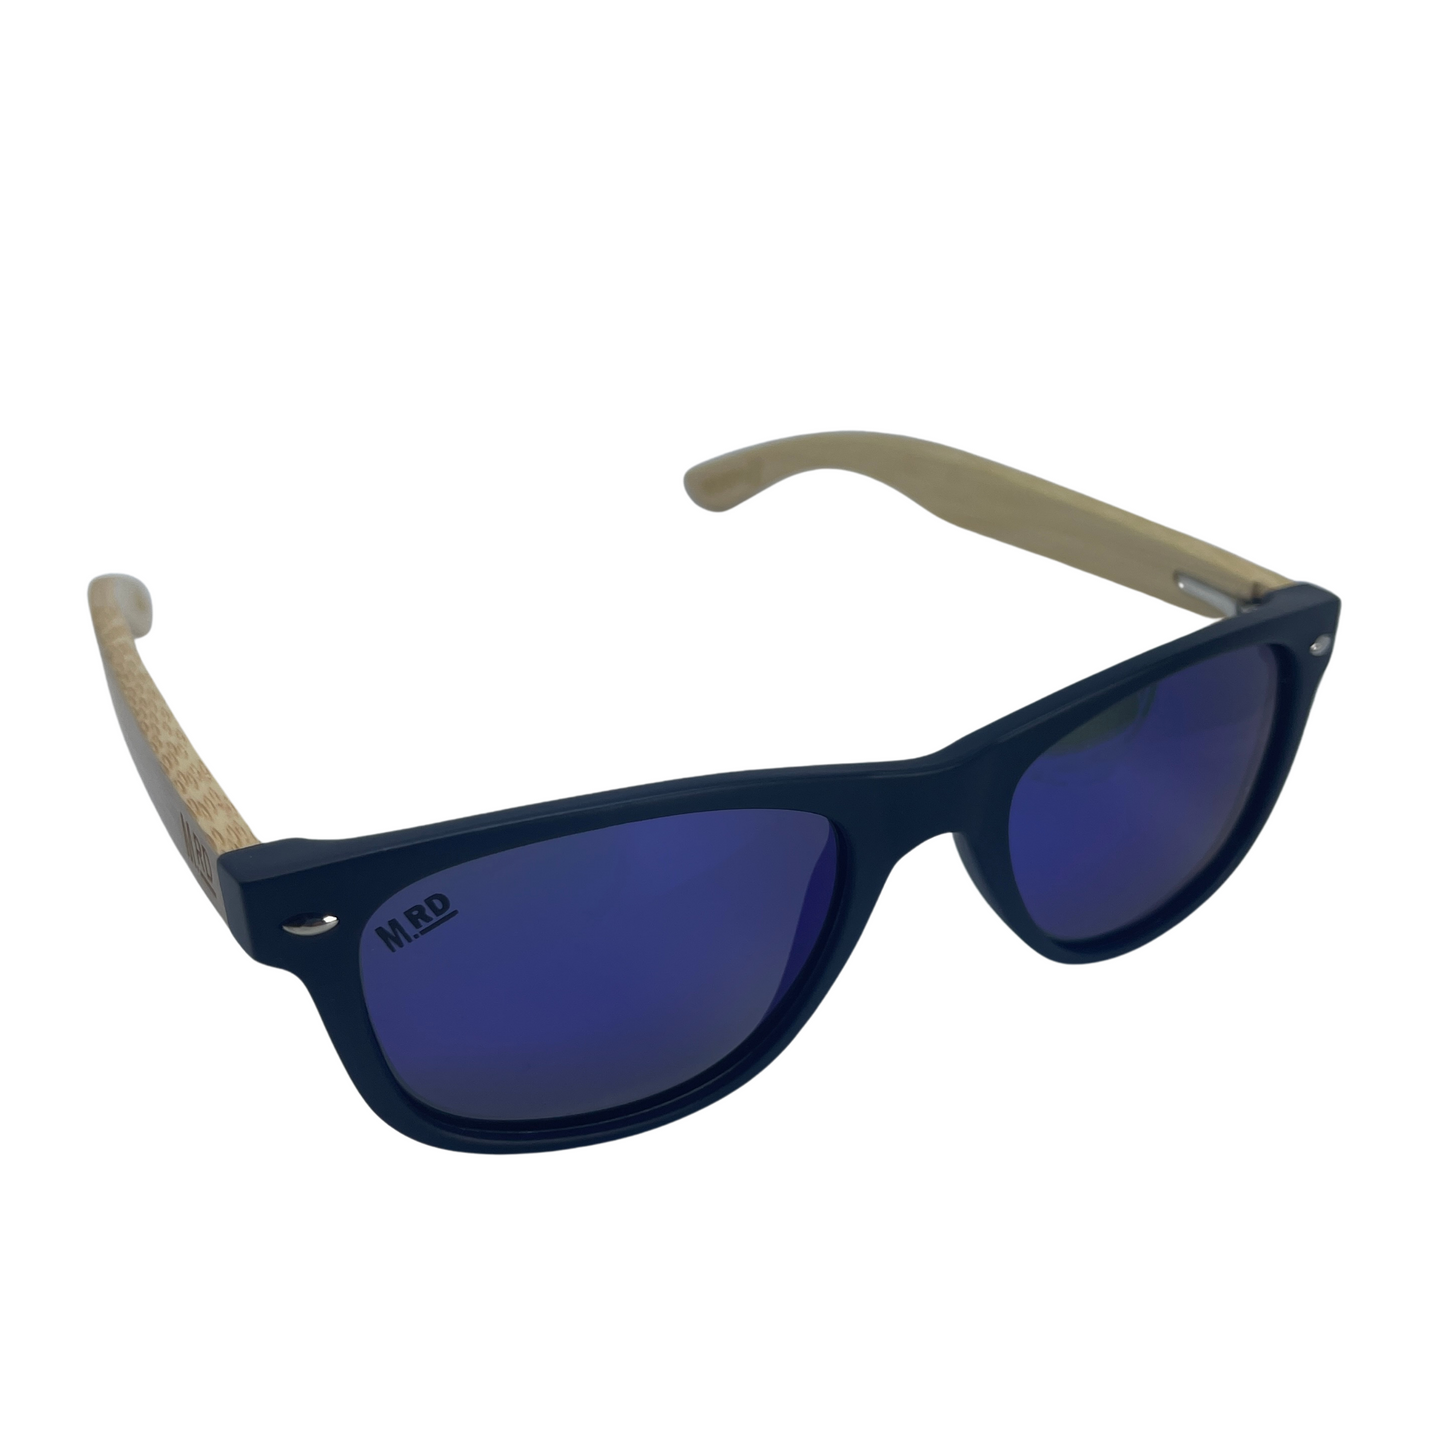 Kids sunglasses with Navy blue frames, blue lenses and wooden arms.